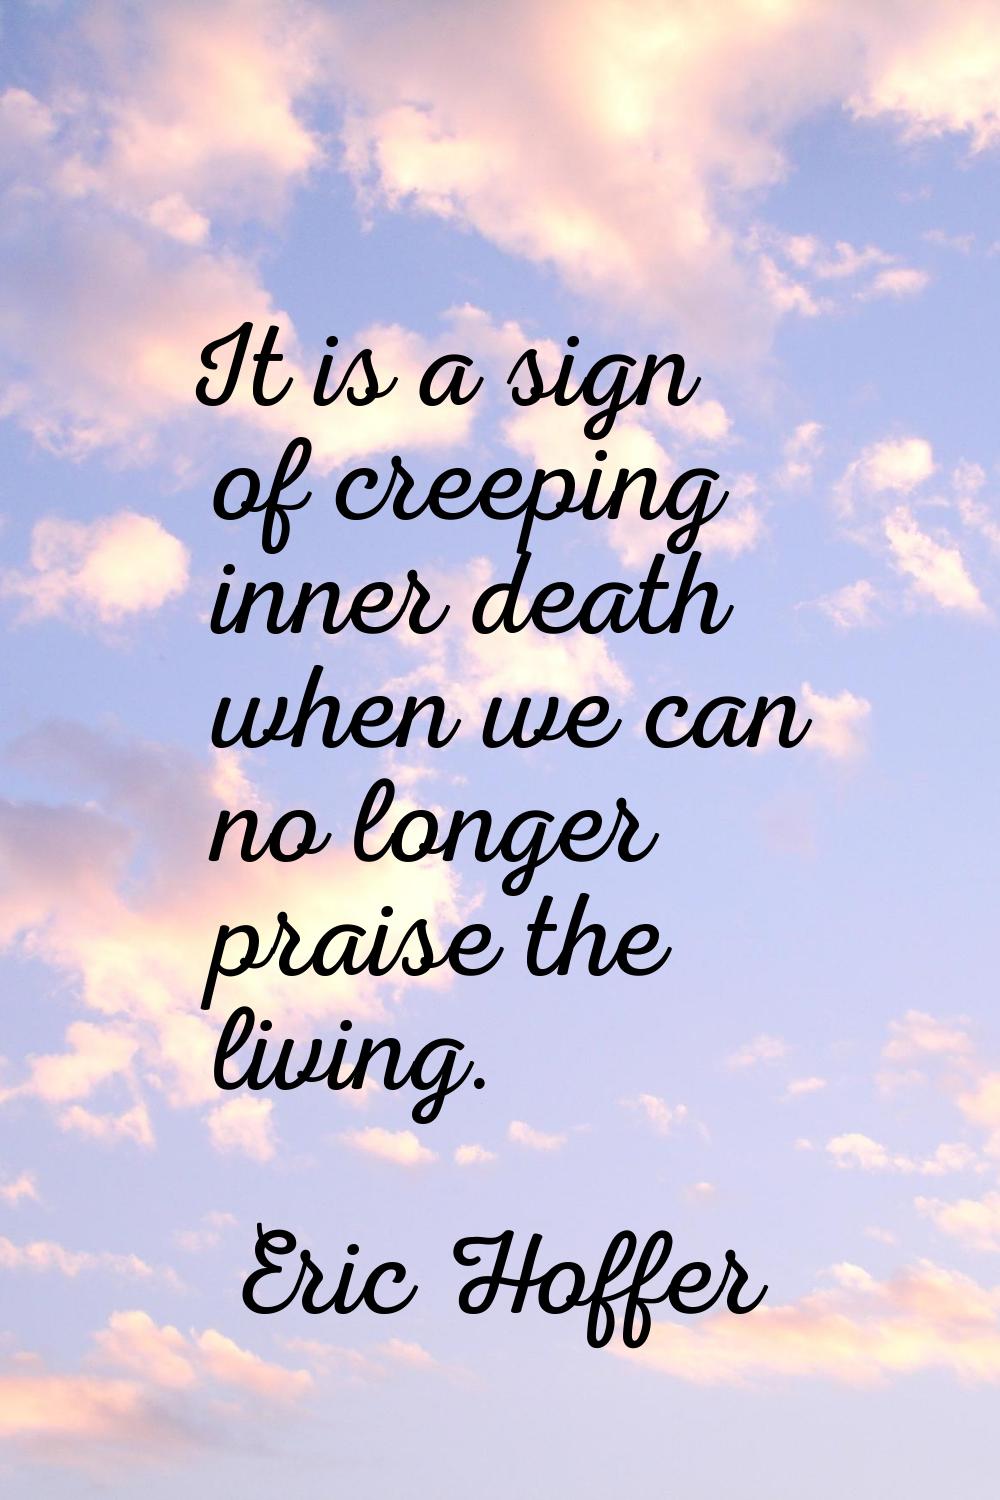 It is a sign of creeping inner death when we can no longer praise the living.